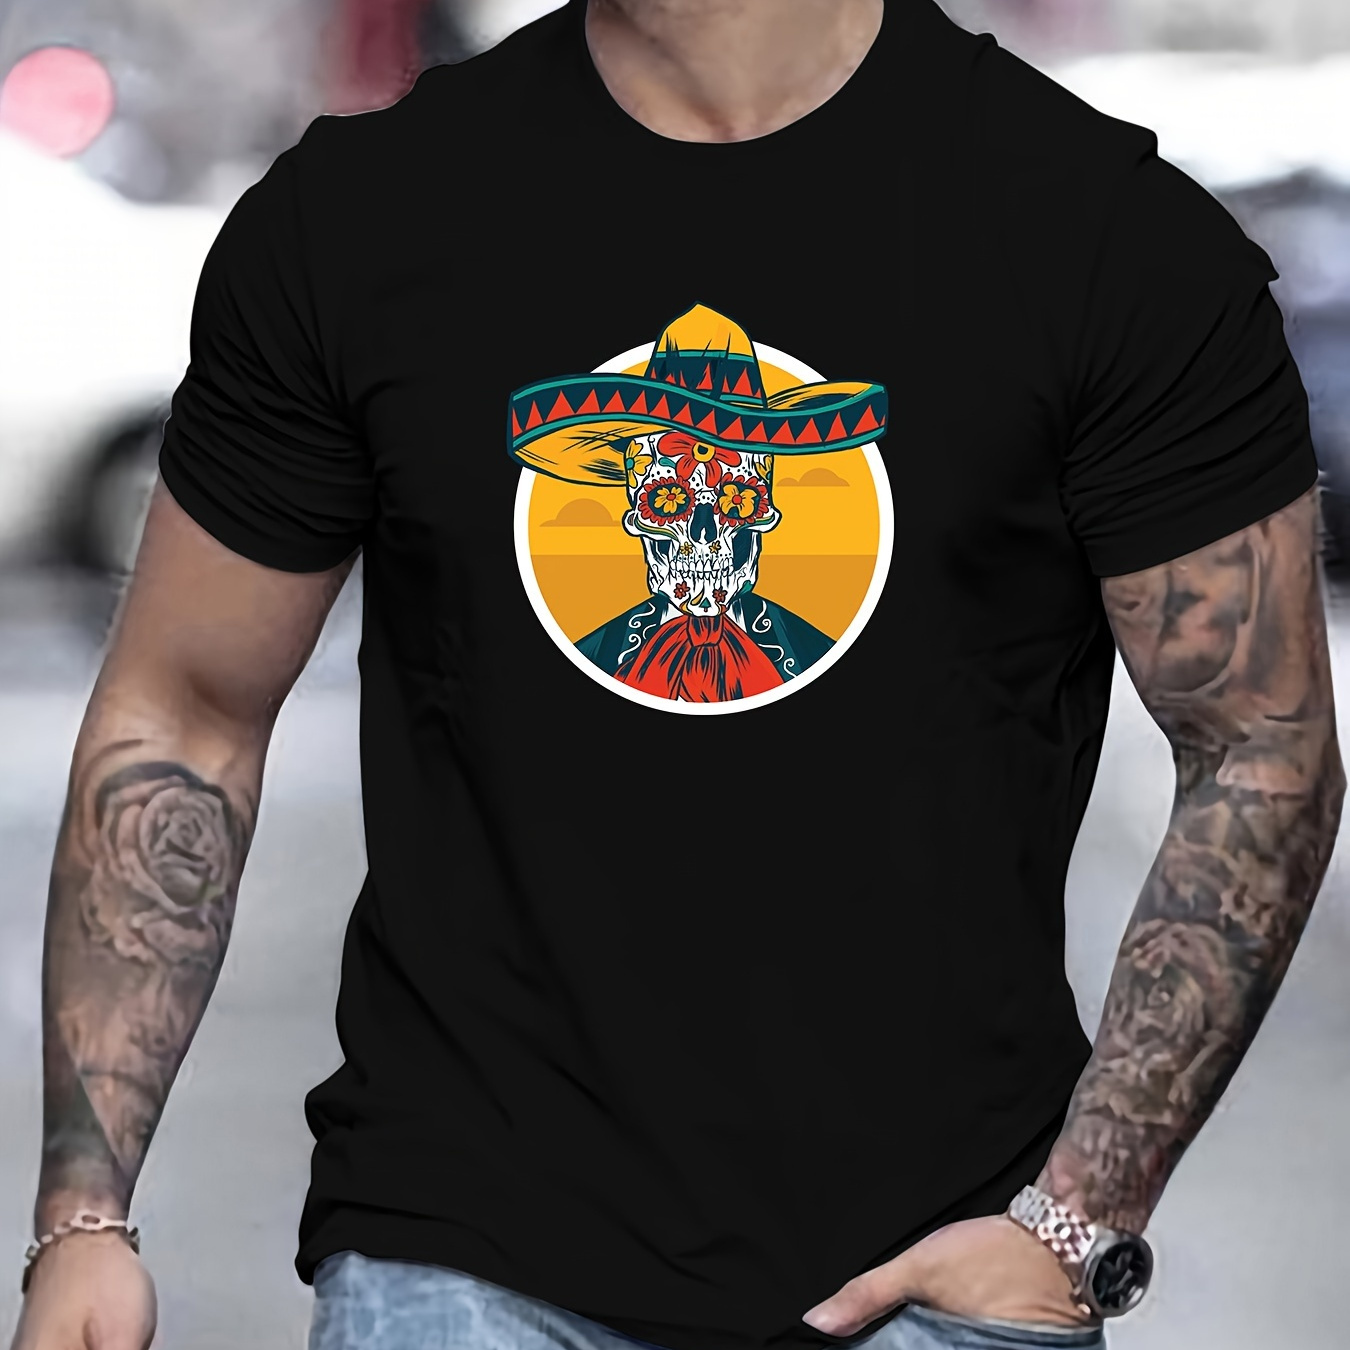 

Mexican Style Skull Print T Shirt, Tees For Men, Casual Short Sleeve T-shirt For Summer